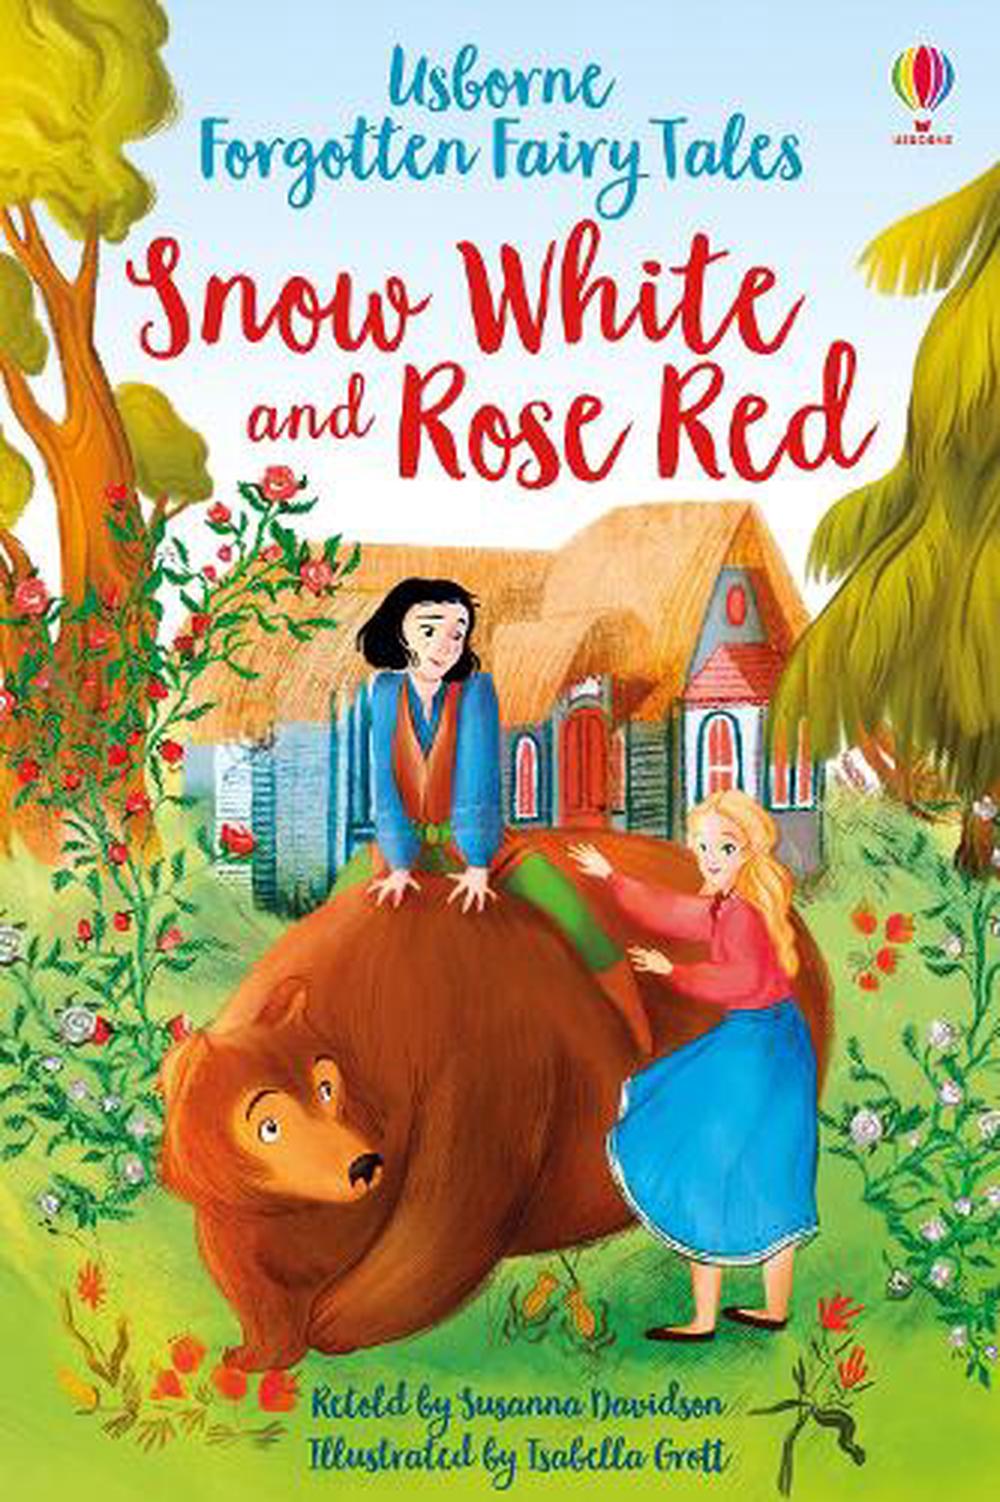 Forgotten Fairy Tales Snow White And Rose Red By Susanna Davidson Hardcover Buy Online At The Nile